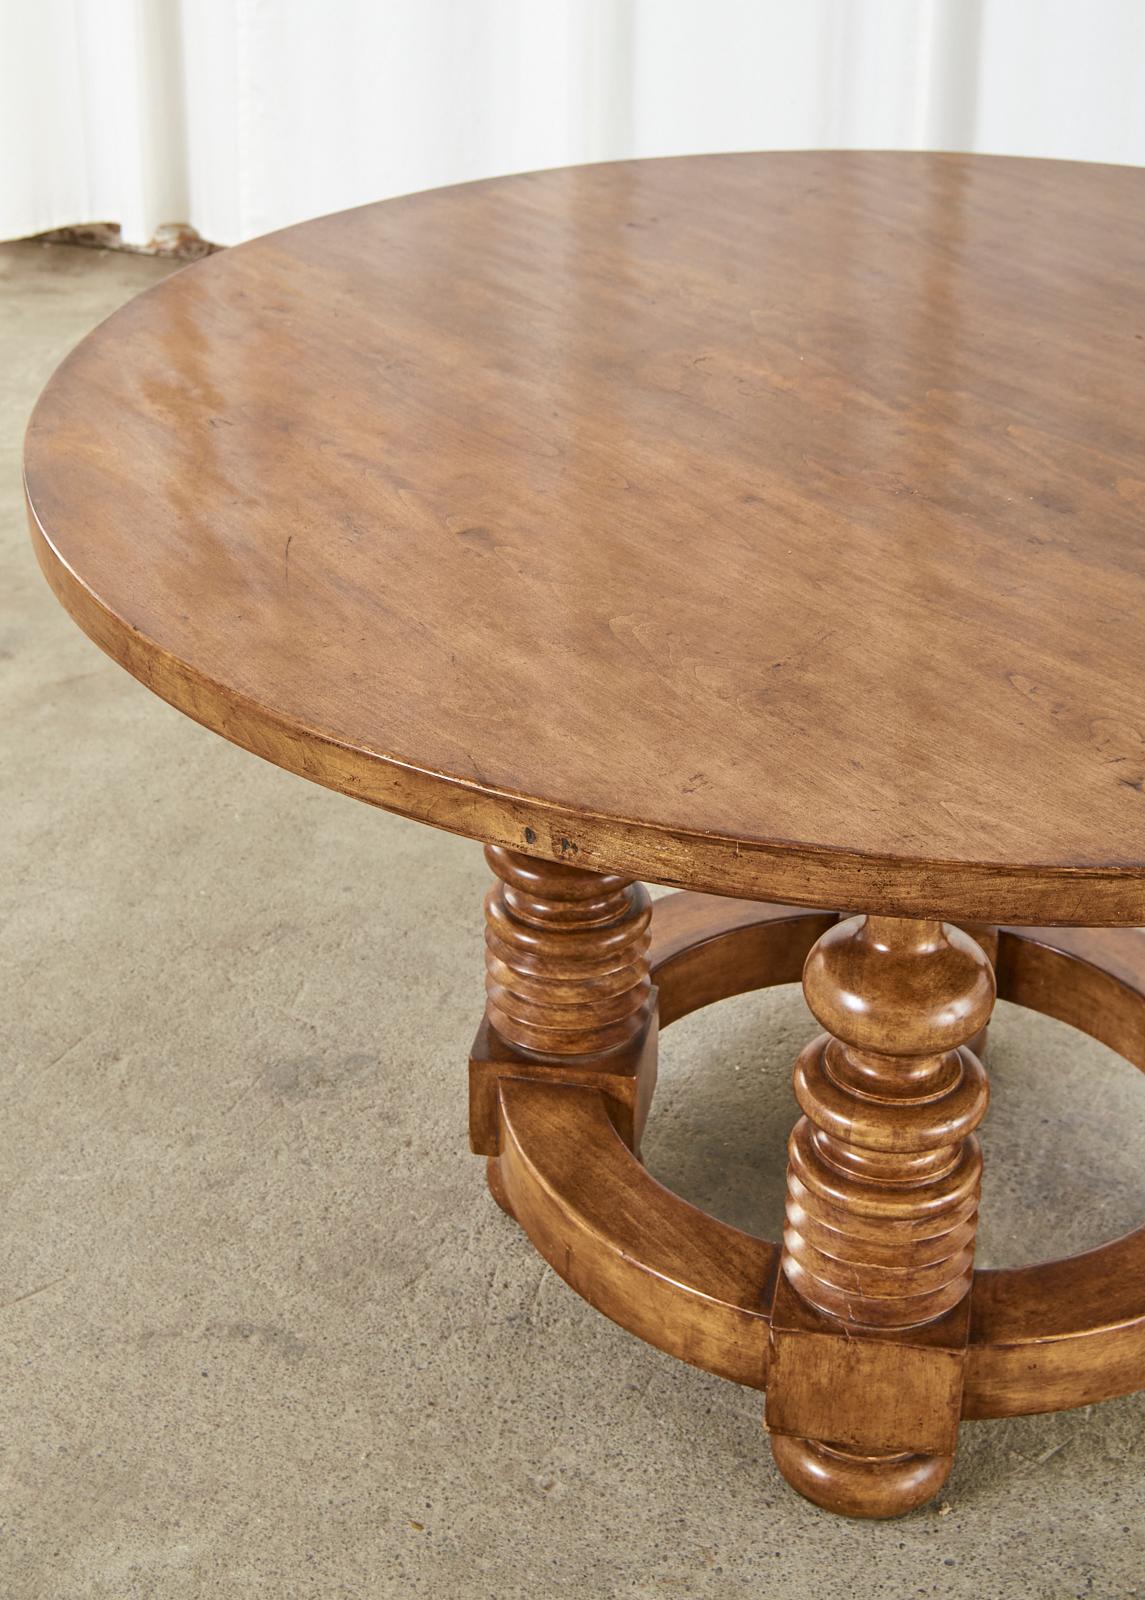 Portuguese Baroque Style Round Dining Room or Center Table 1